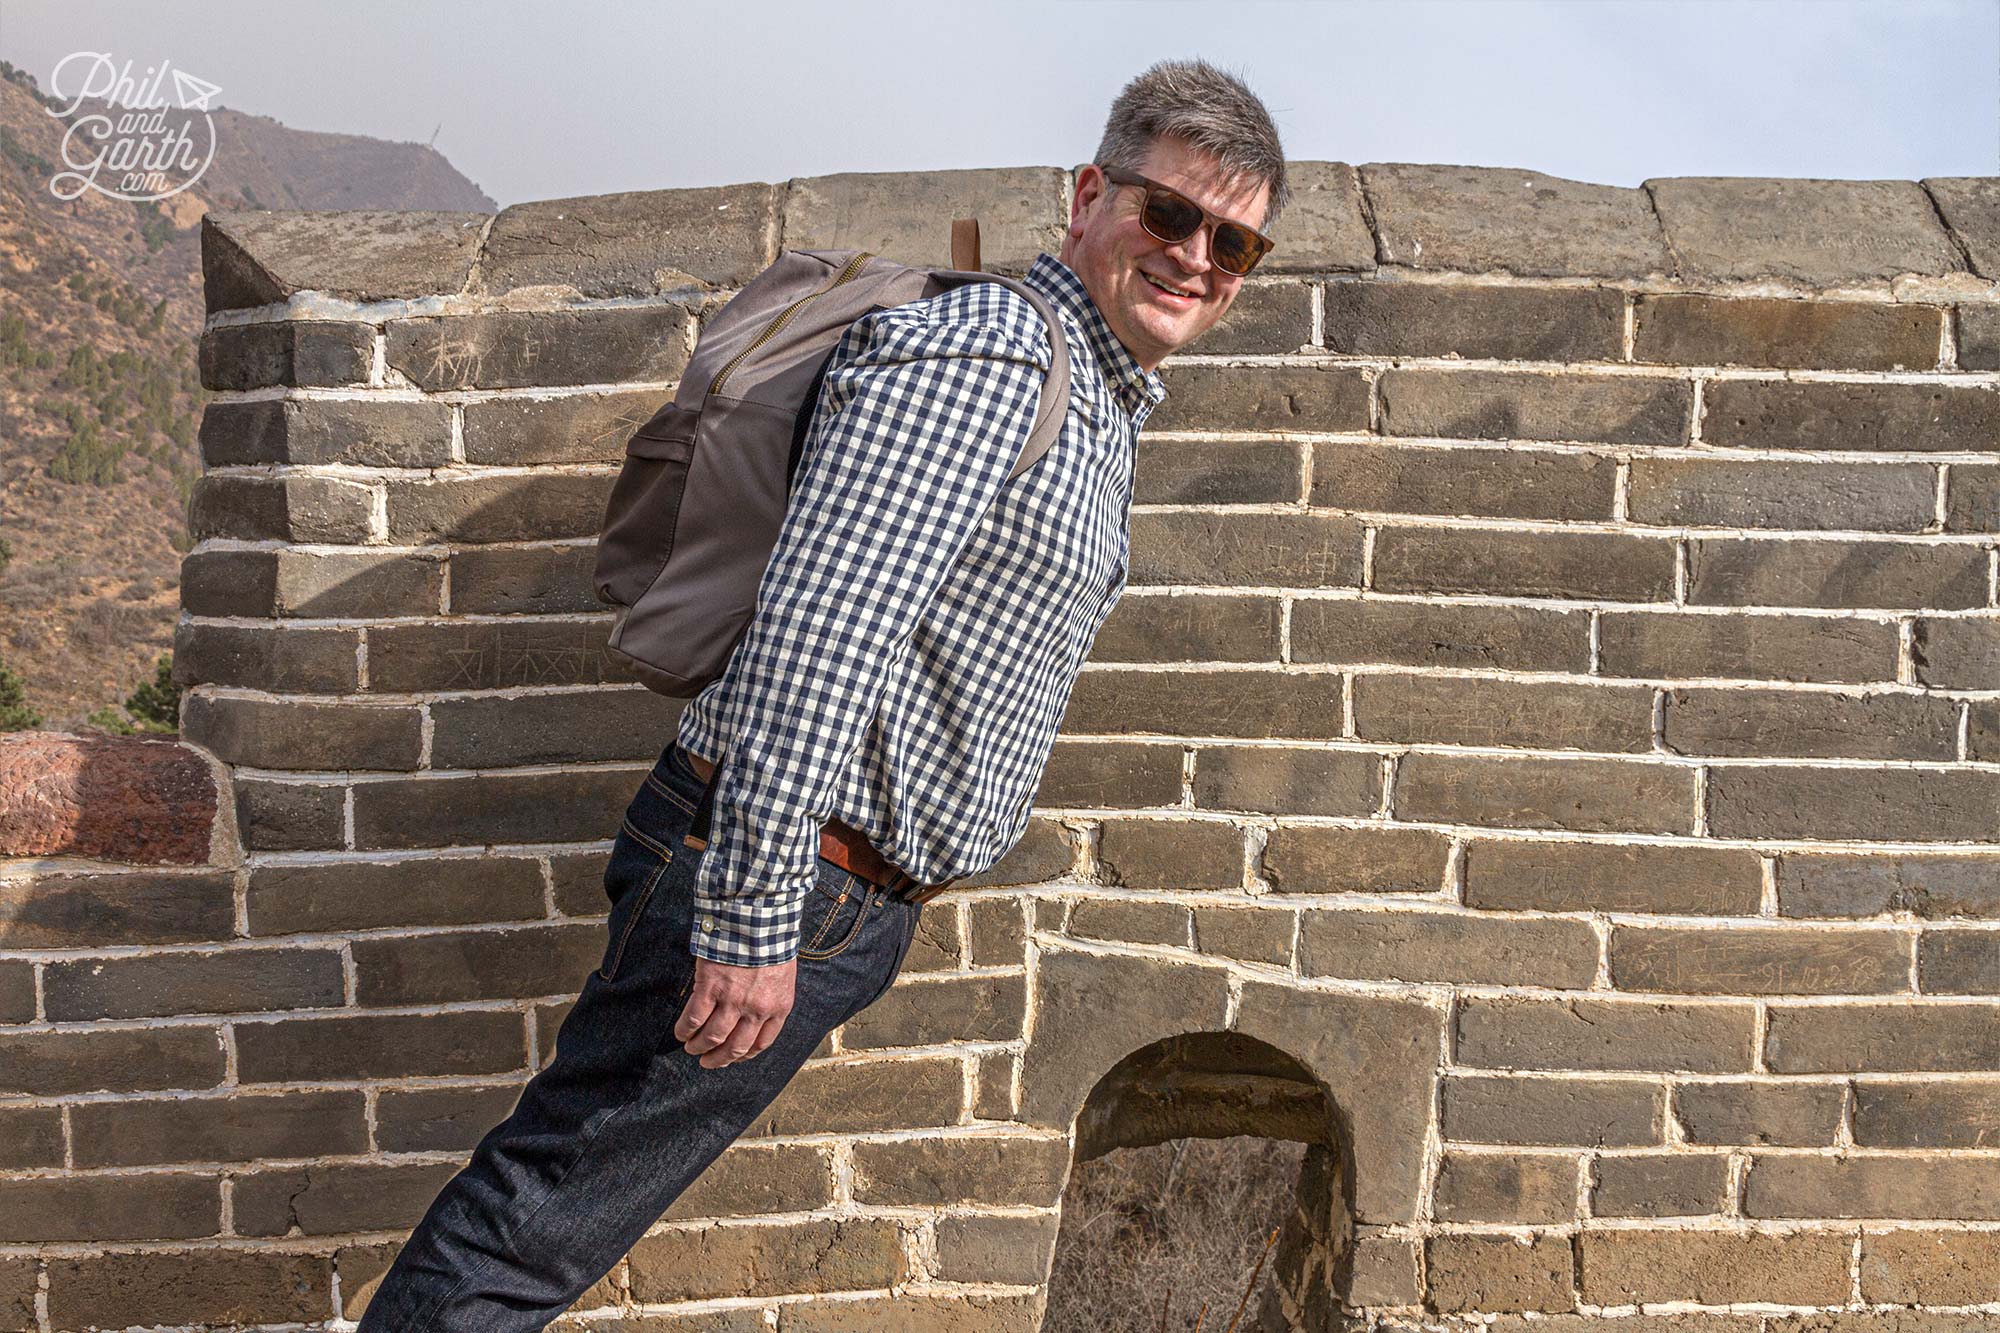 Phil performs magic tricks on the Great Wall of China